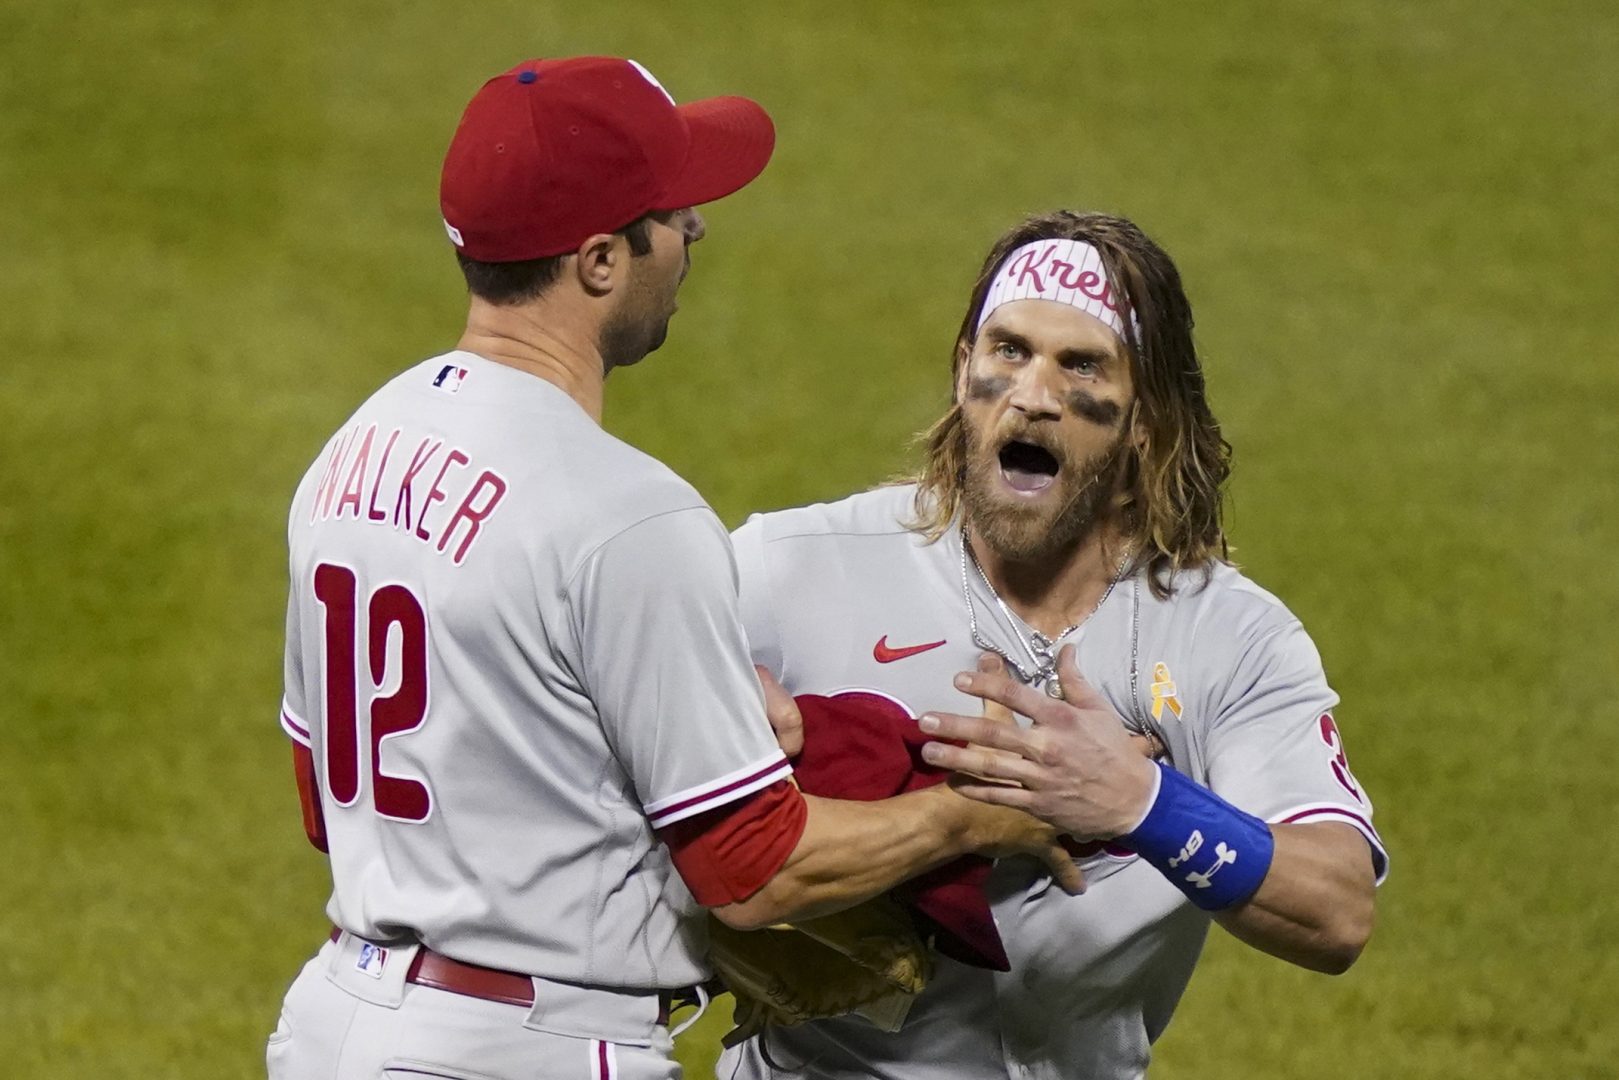 Angry Harper throws helmet into stands, where 10-year-old Phillies